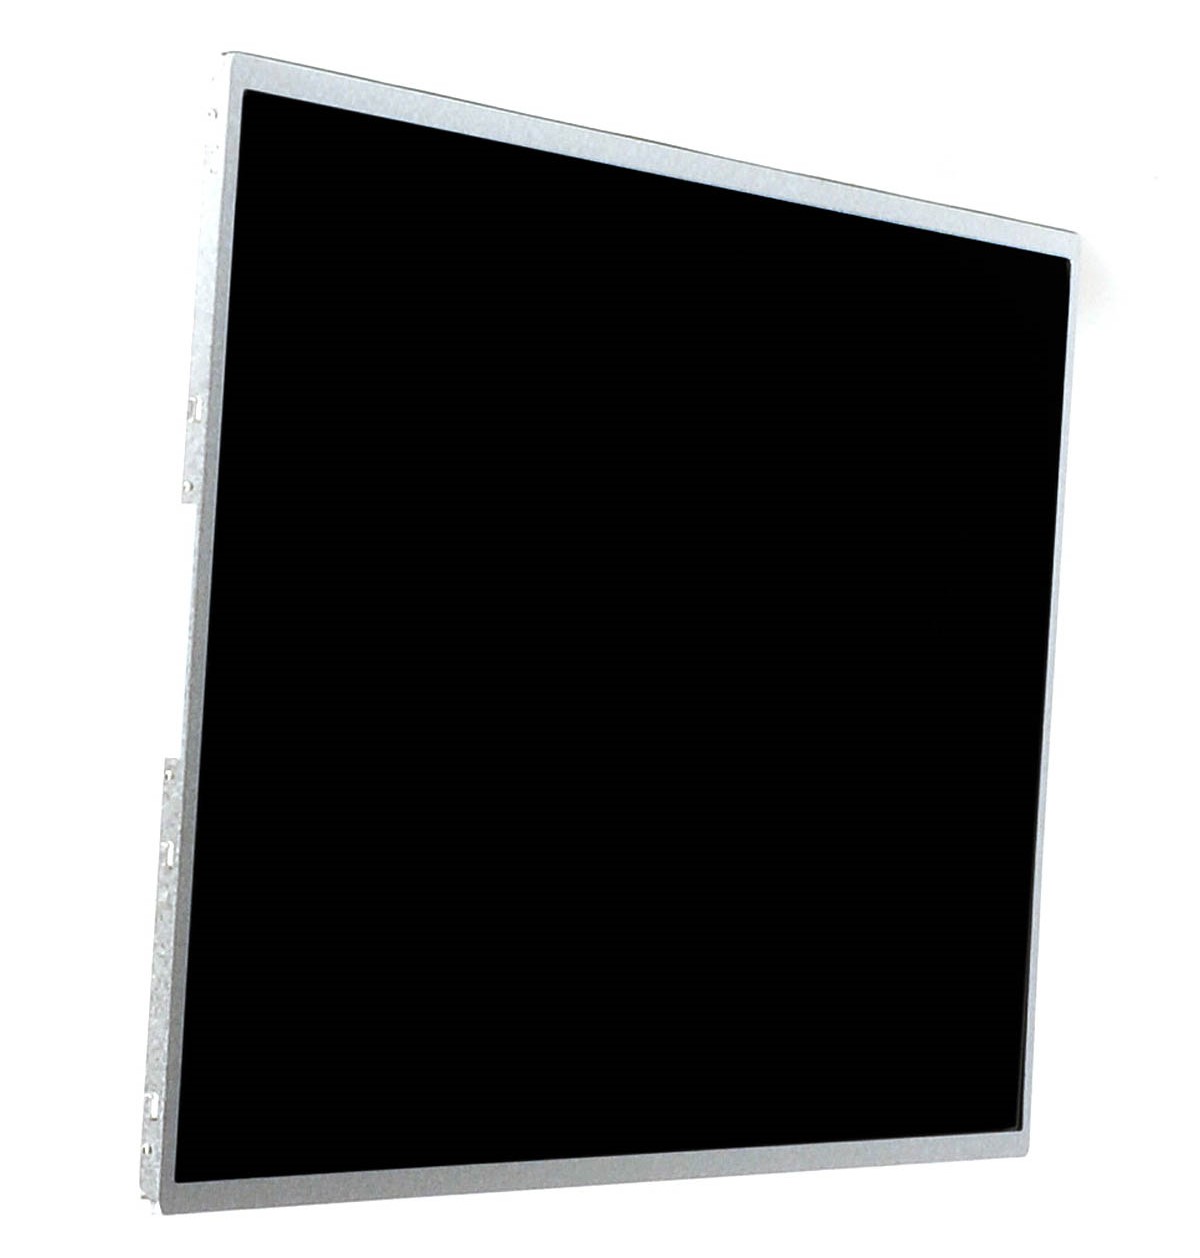 ACER ASPIRE V3-571-6849 REPLACEMENT LAPTOP 15.6" LCD LED Display Screen - image 3 of 4